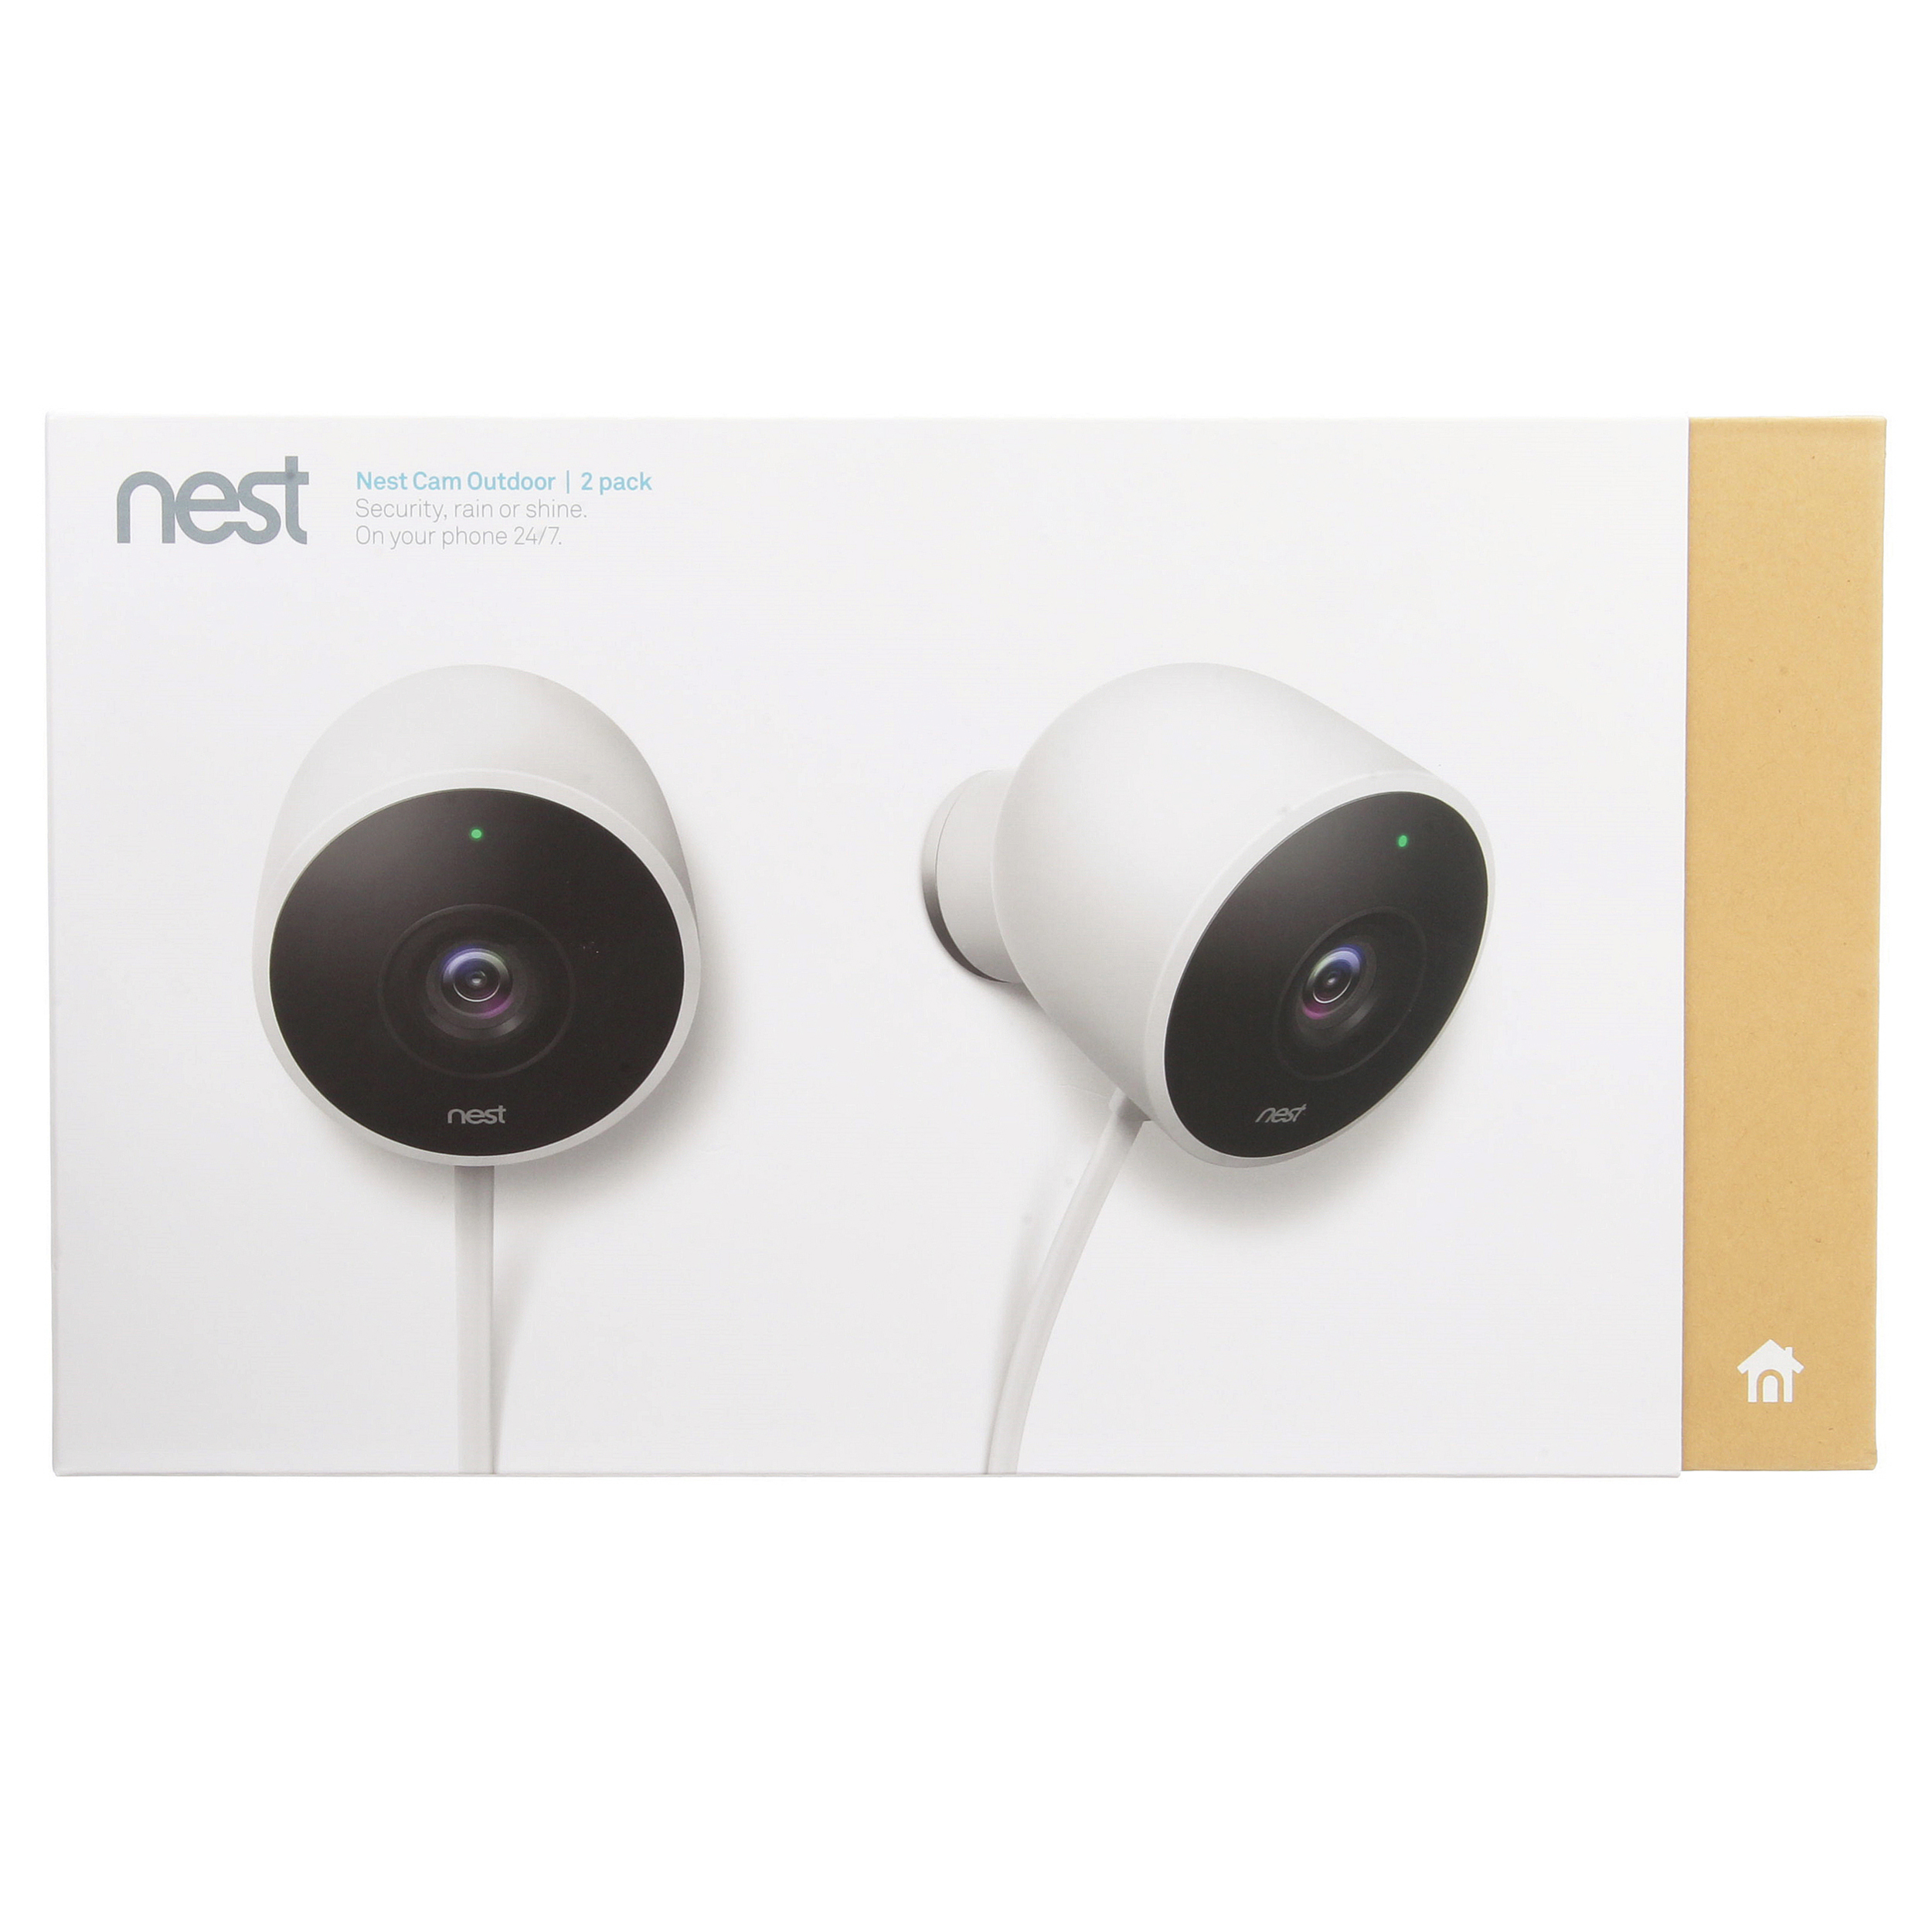 Google Nest Cam Outdoor Security Camera, 2-Pack - image 5 of 7